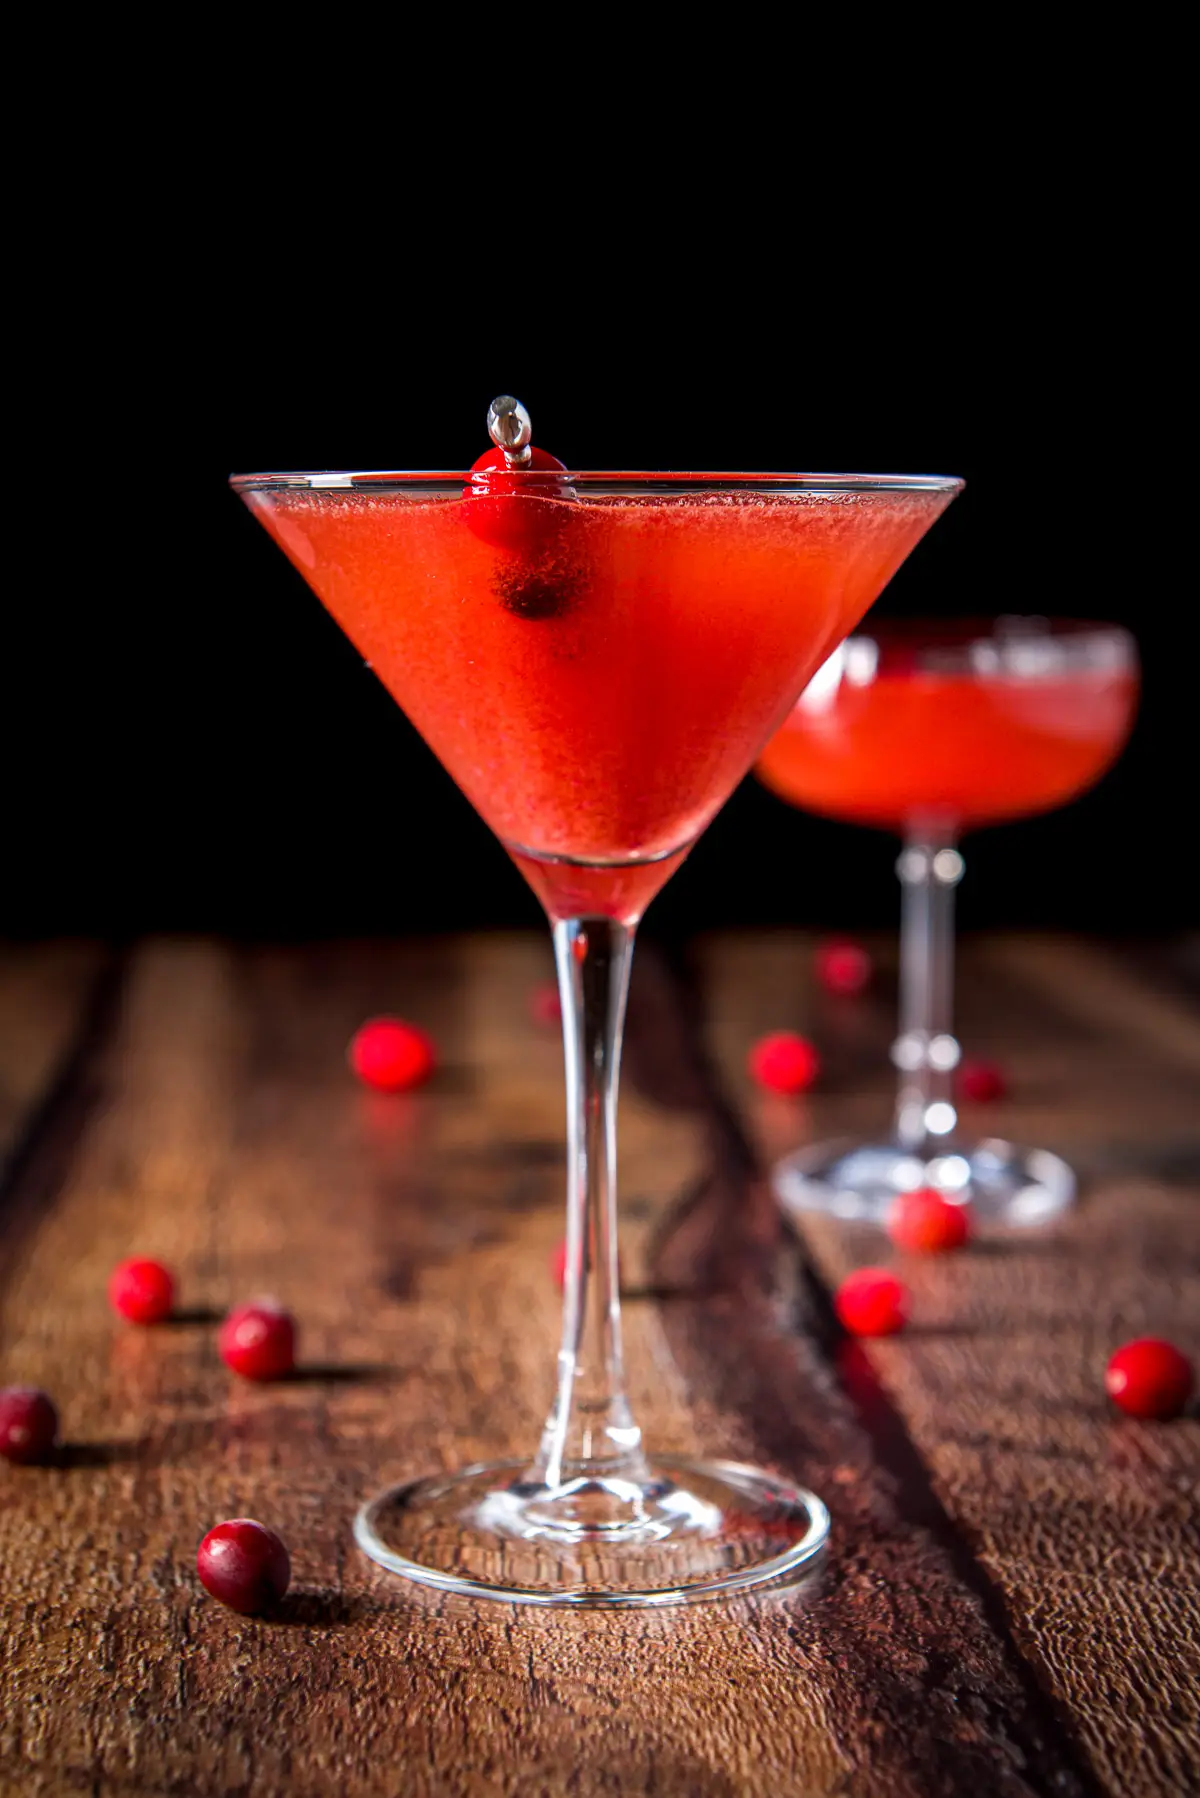 Classic martini glass with the red cocktail in it along with cranberries on a pick